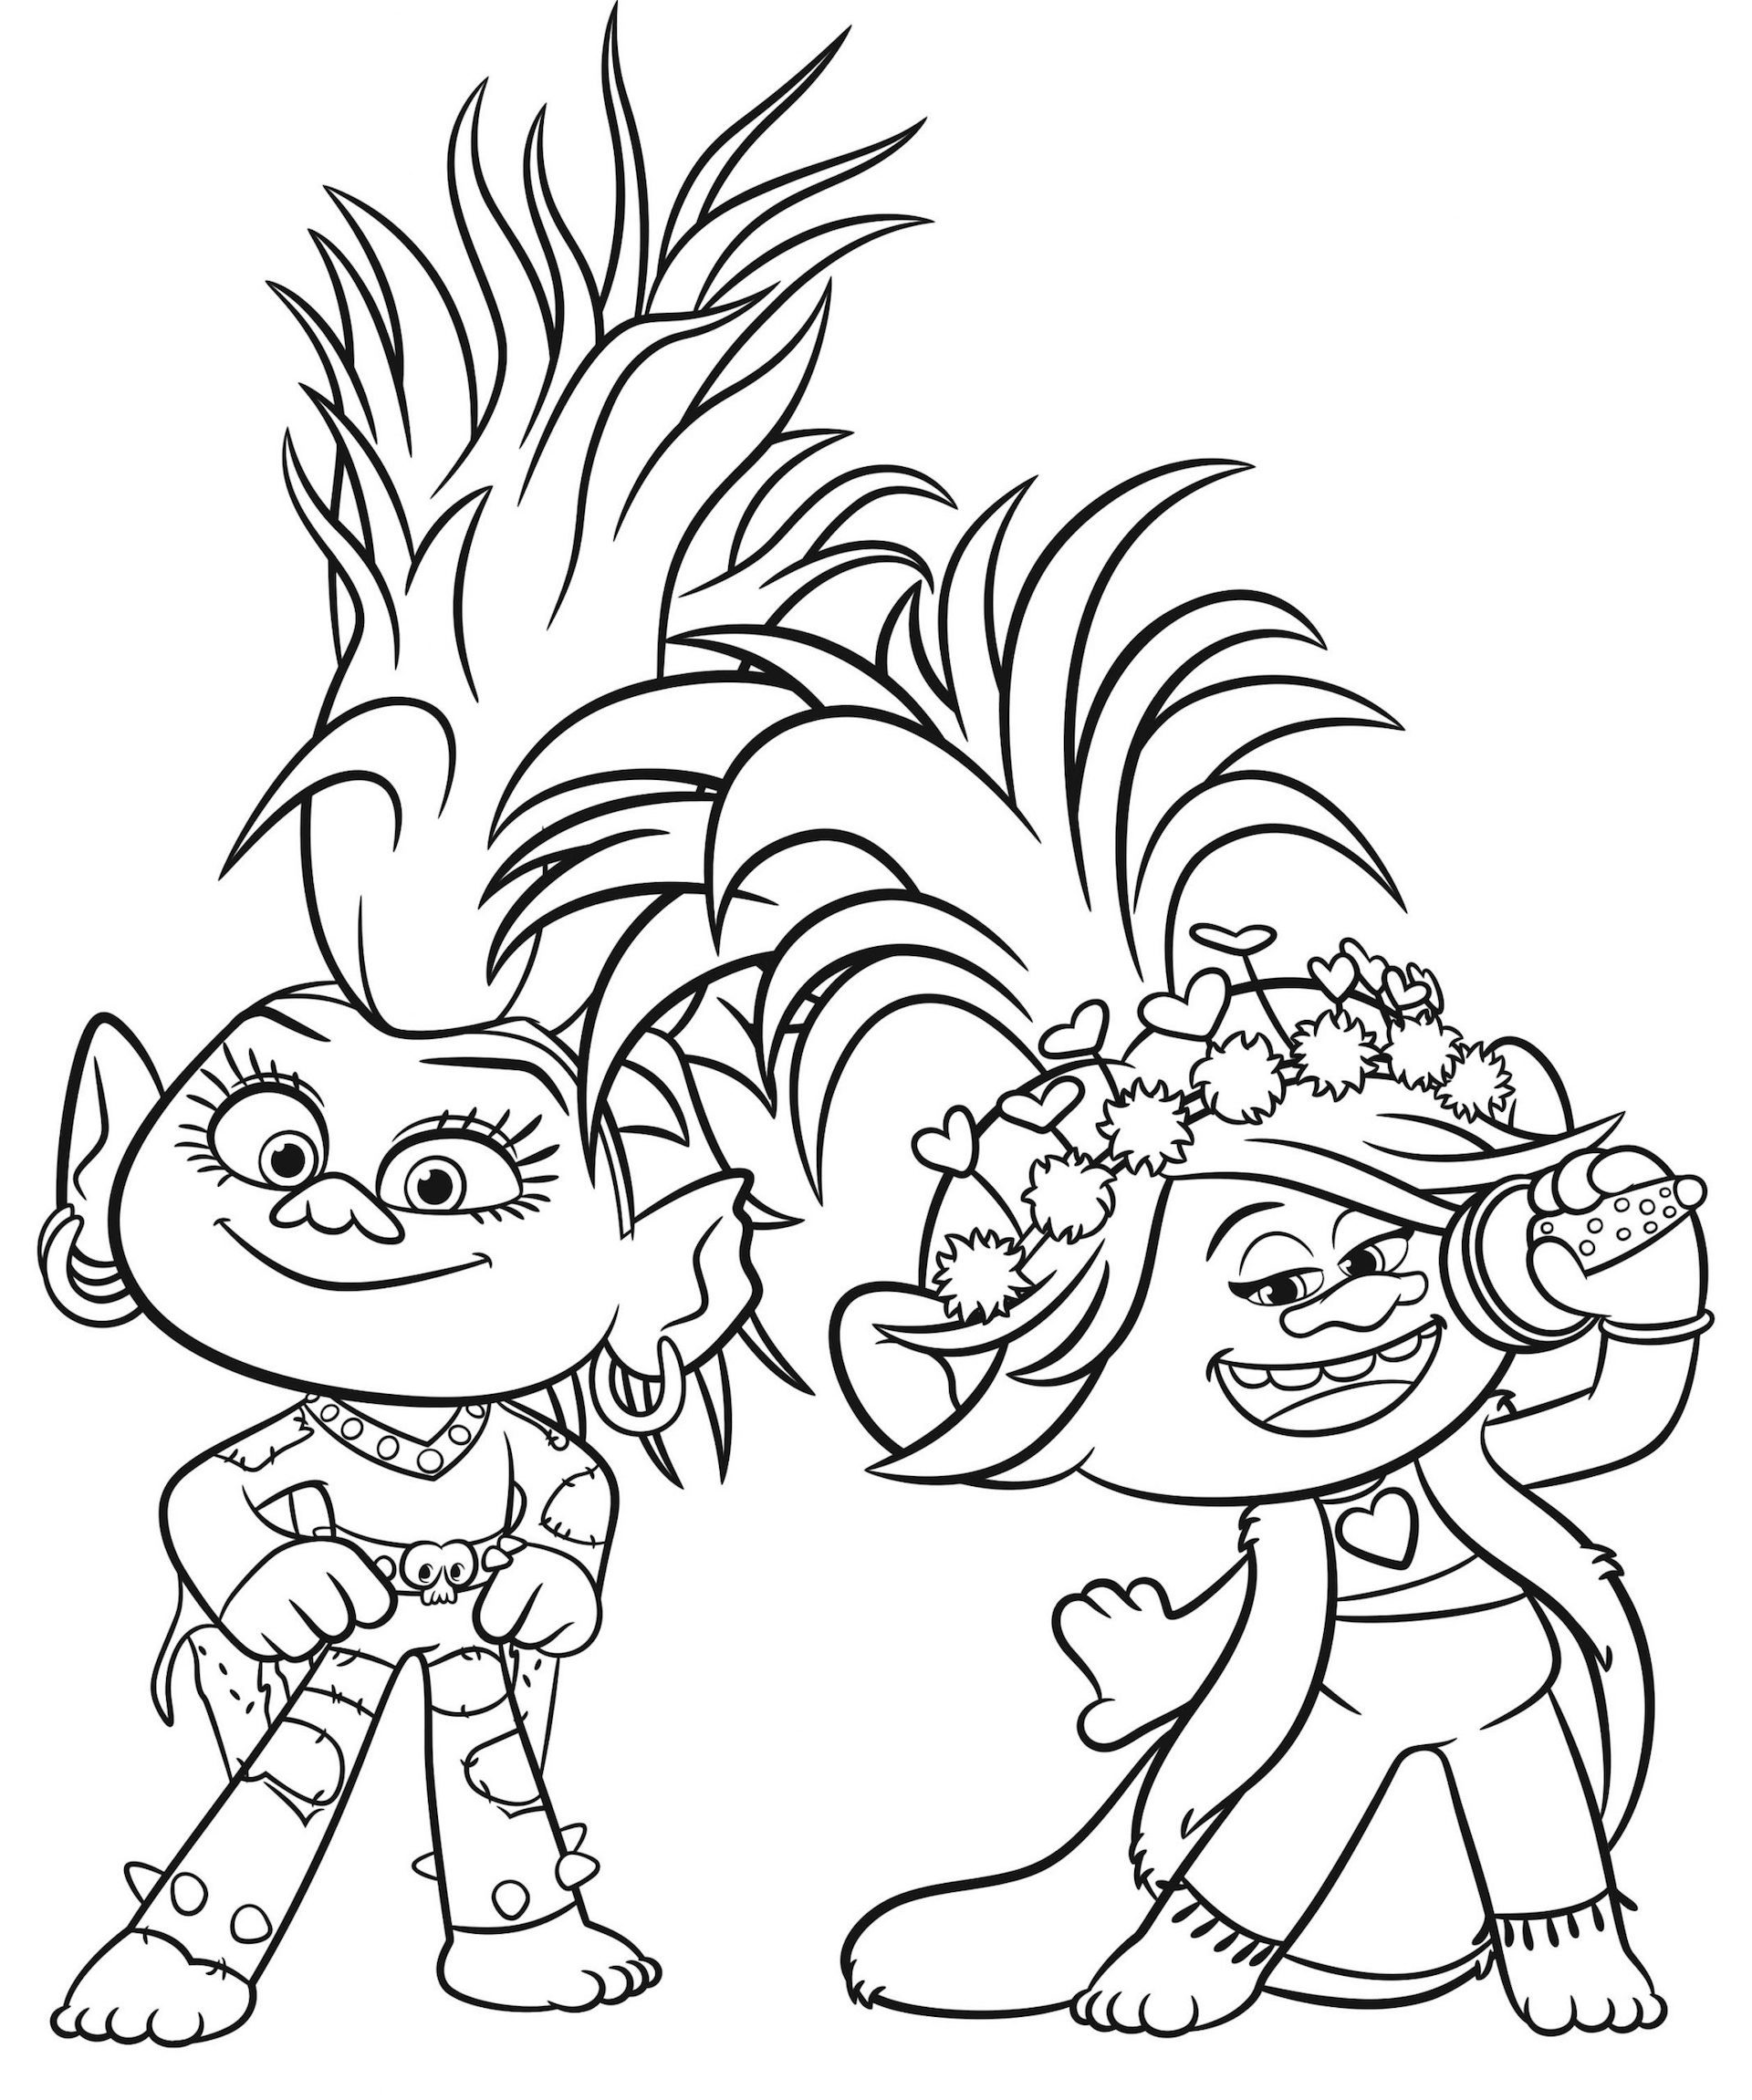 Printable Troll Coloring Pages